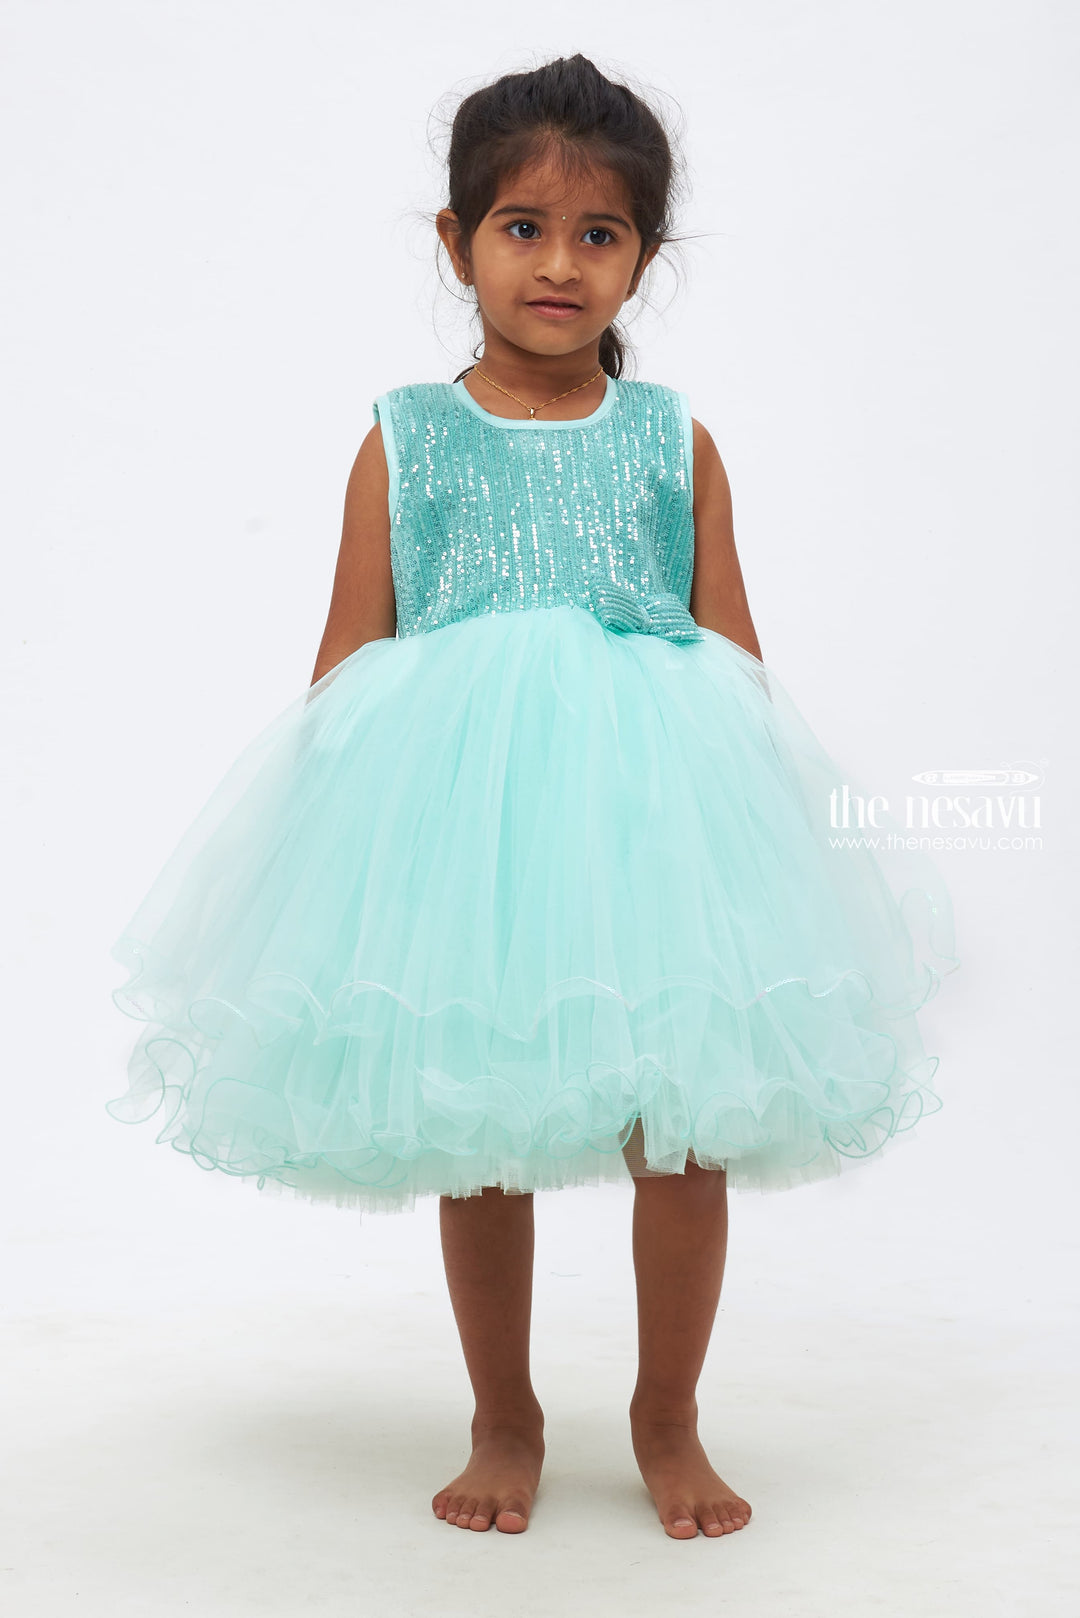 The Nesavu Girls Tutu Frock Girls Turquoise Tulle Dress with Glistening Sequin Embroidery Nesavu 16 (1Y) / Turquoise / Plain Net PF161B-16 Girls Sequin and Tulle Party Dresses | Glamorous and Cute | The Nesavu